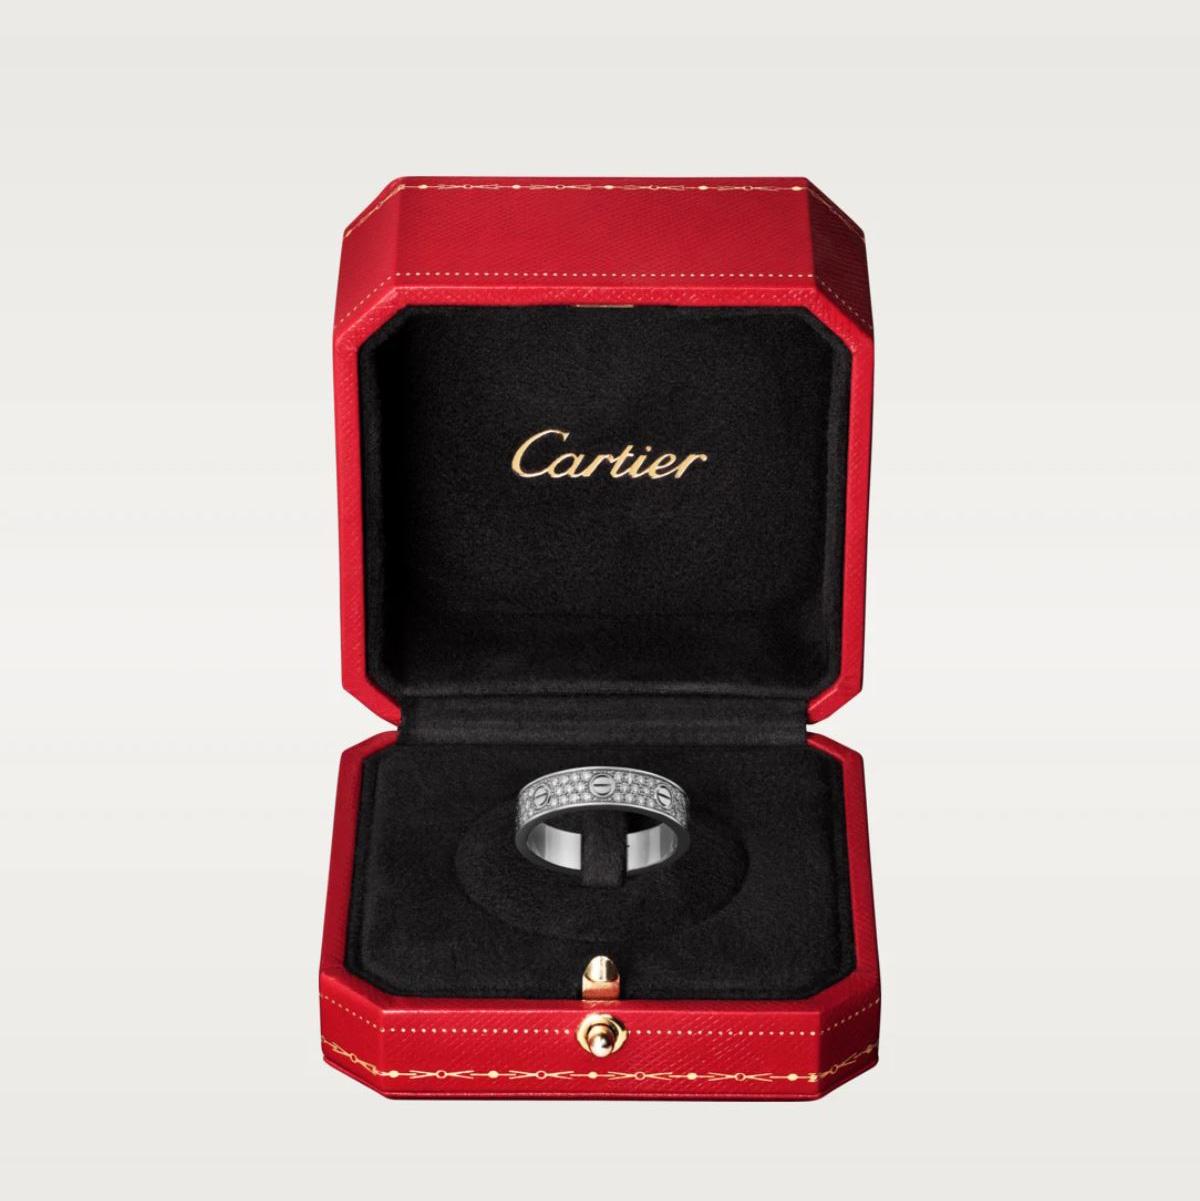 cartier ring dimensions